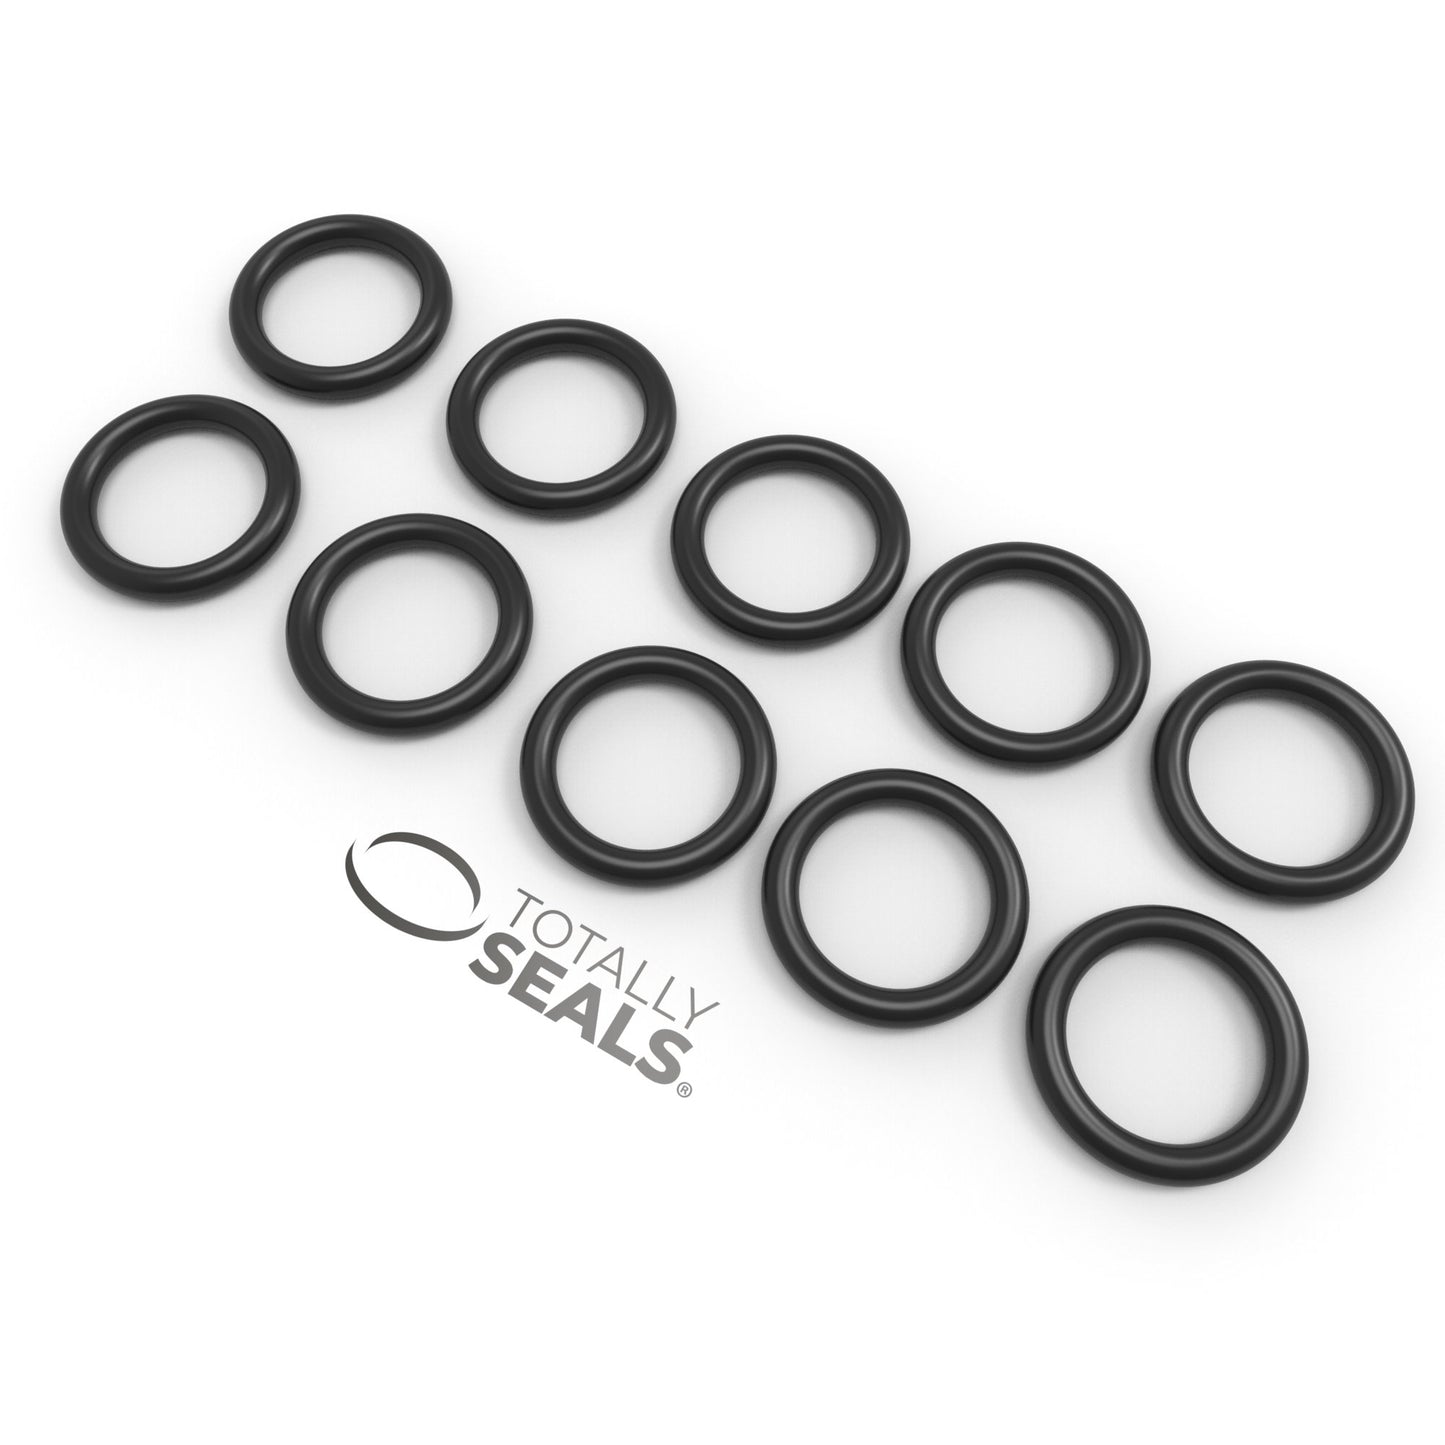 5/32" x 1/16" (BS007) Imperial Nitrile O-Rings - Totally Seals®